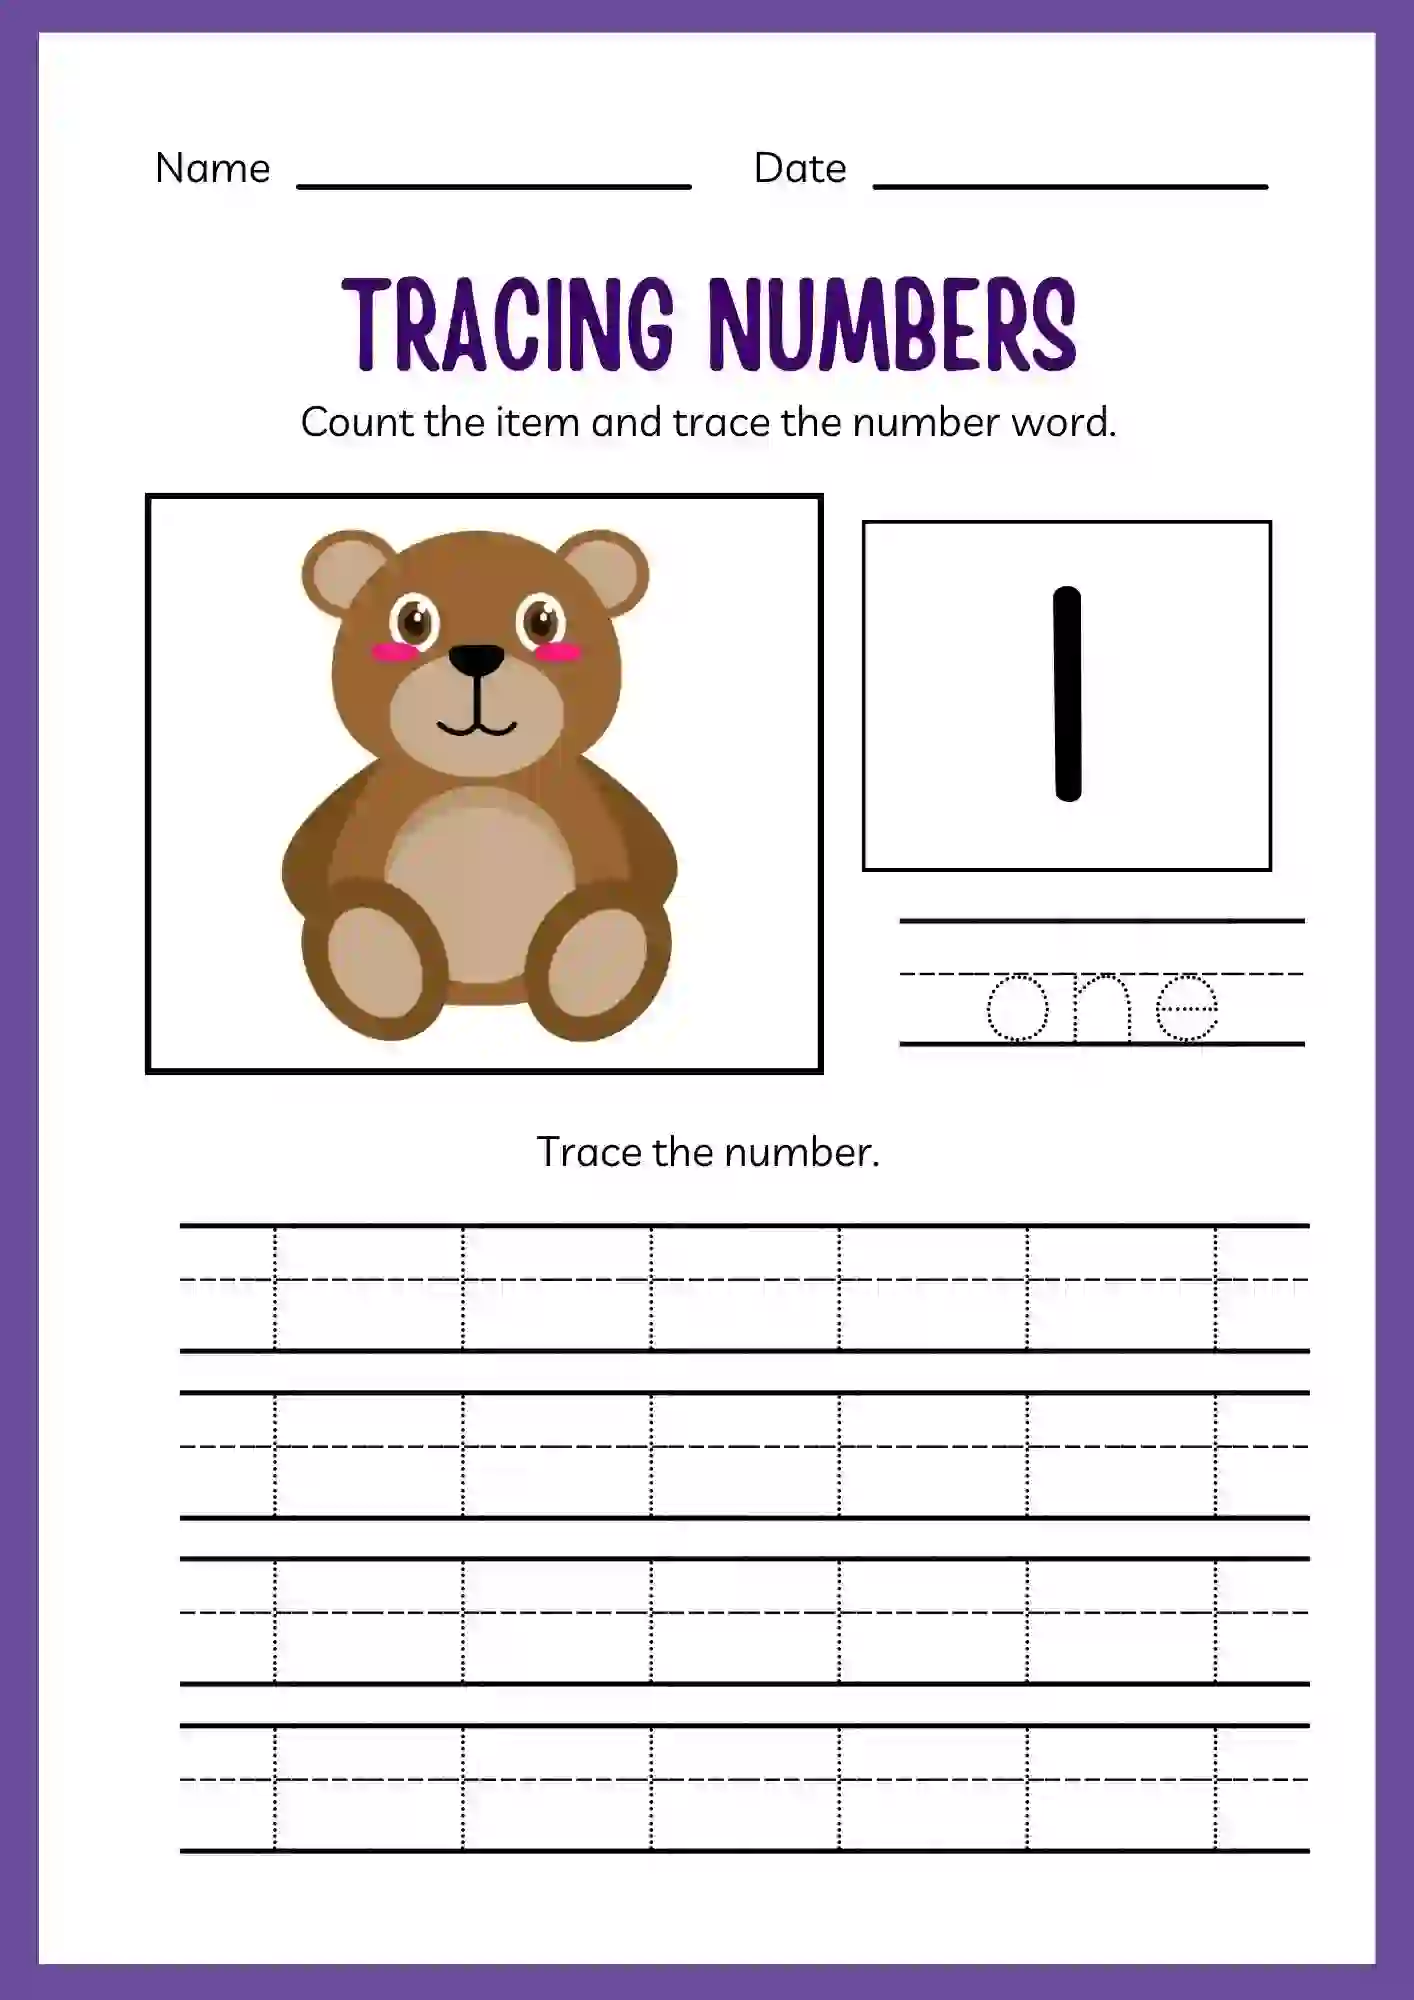 Number Tracing Worksheets 1 to 20 (Number 1 tracing sheet)